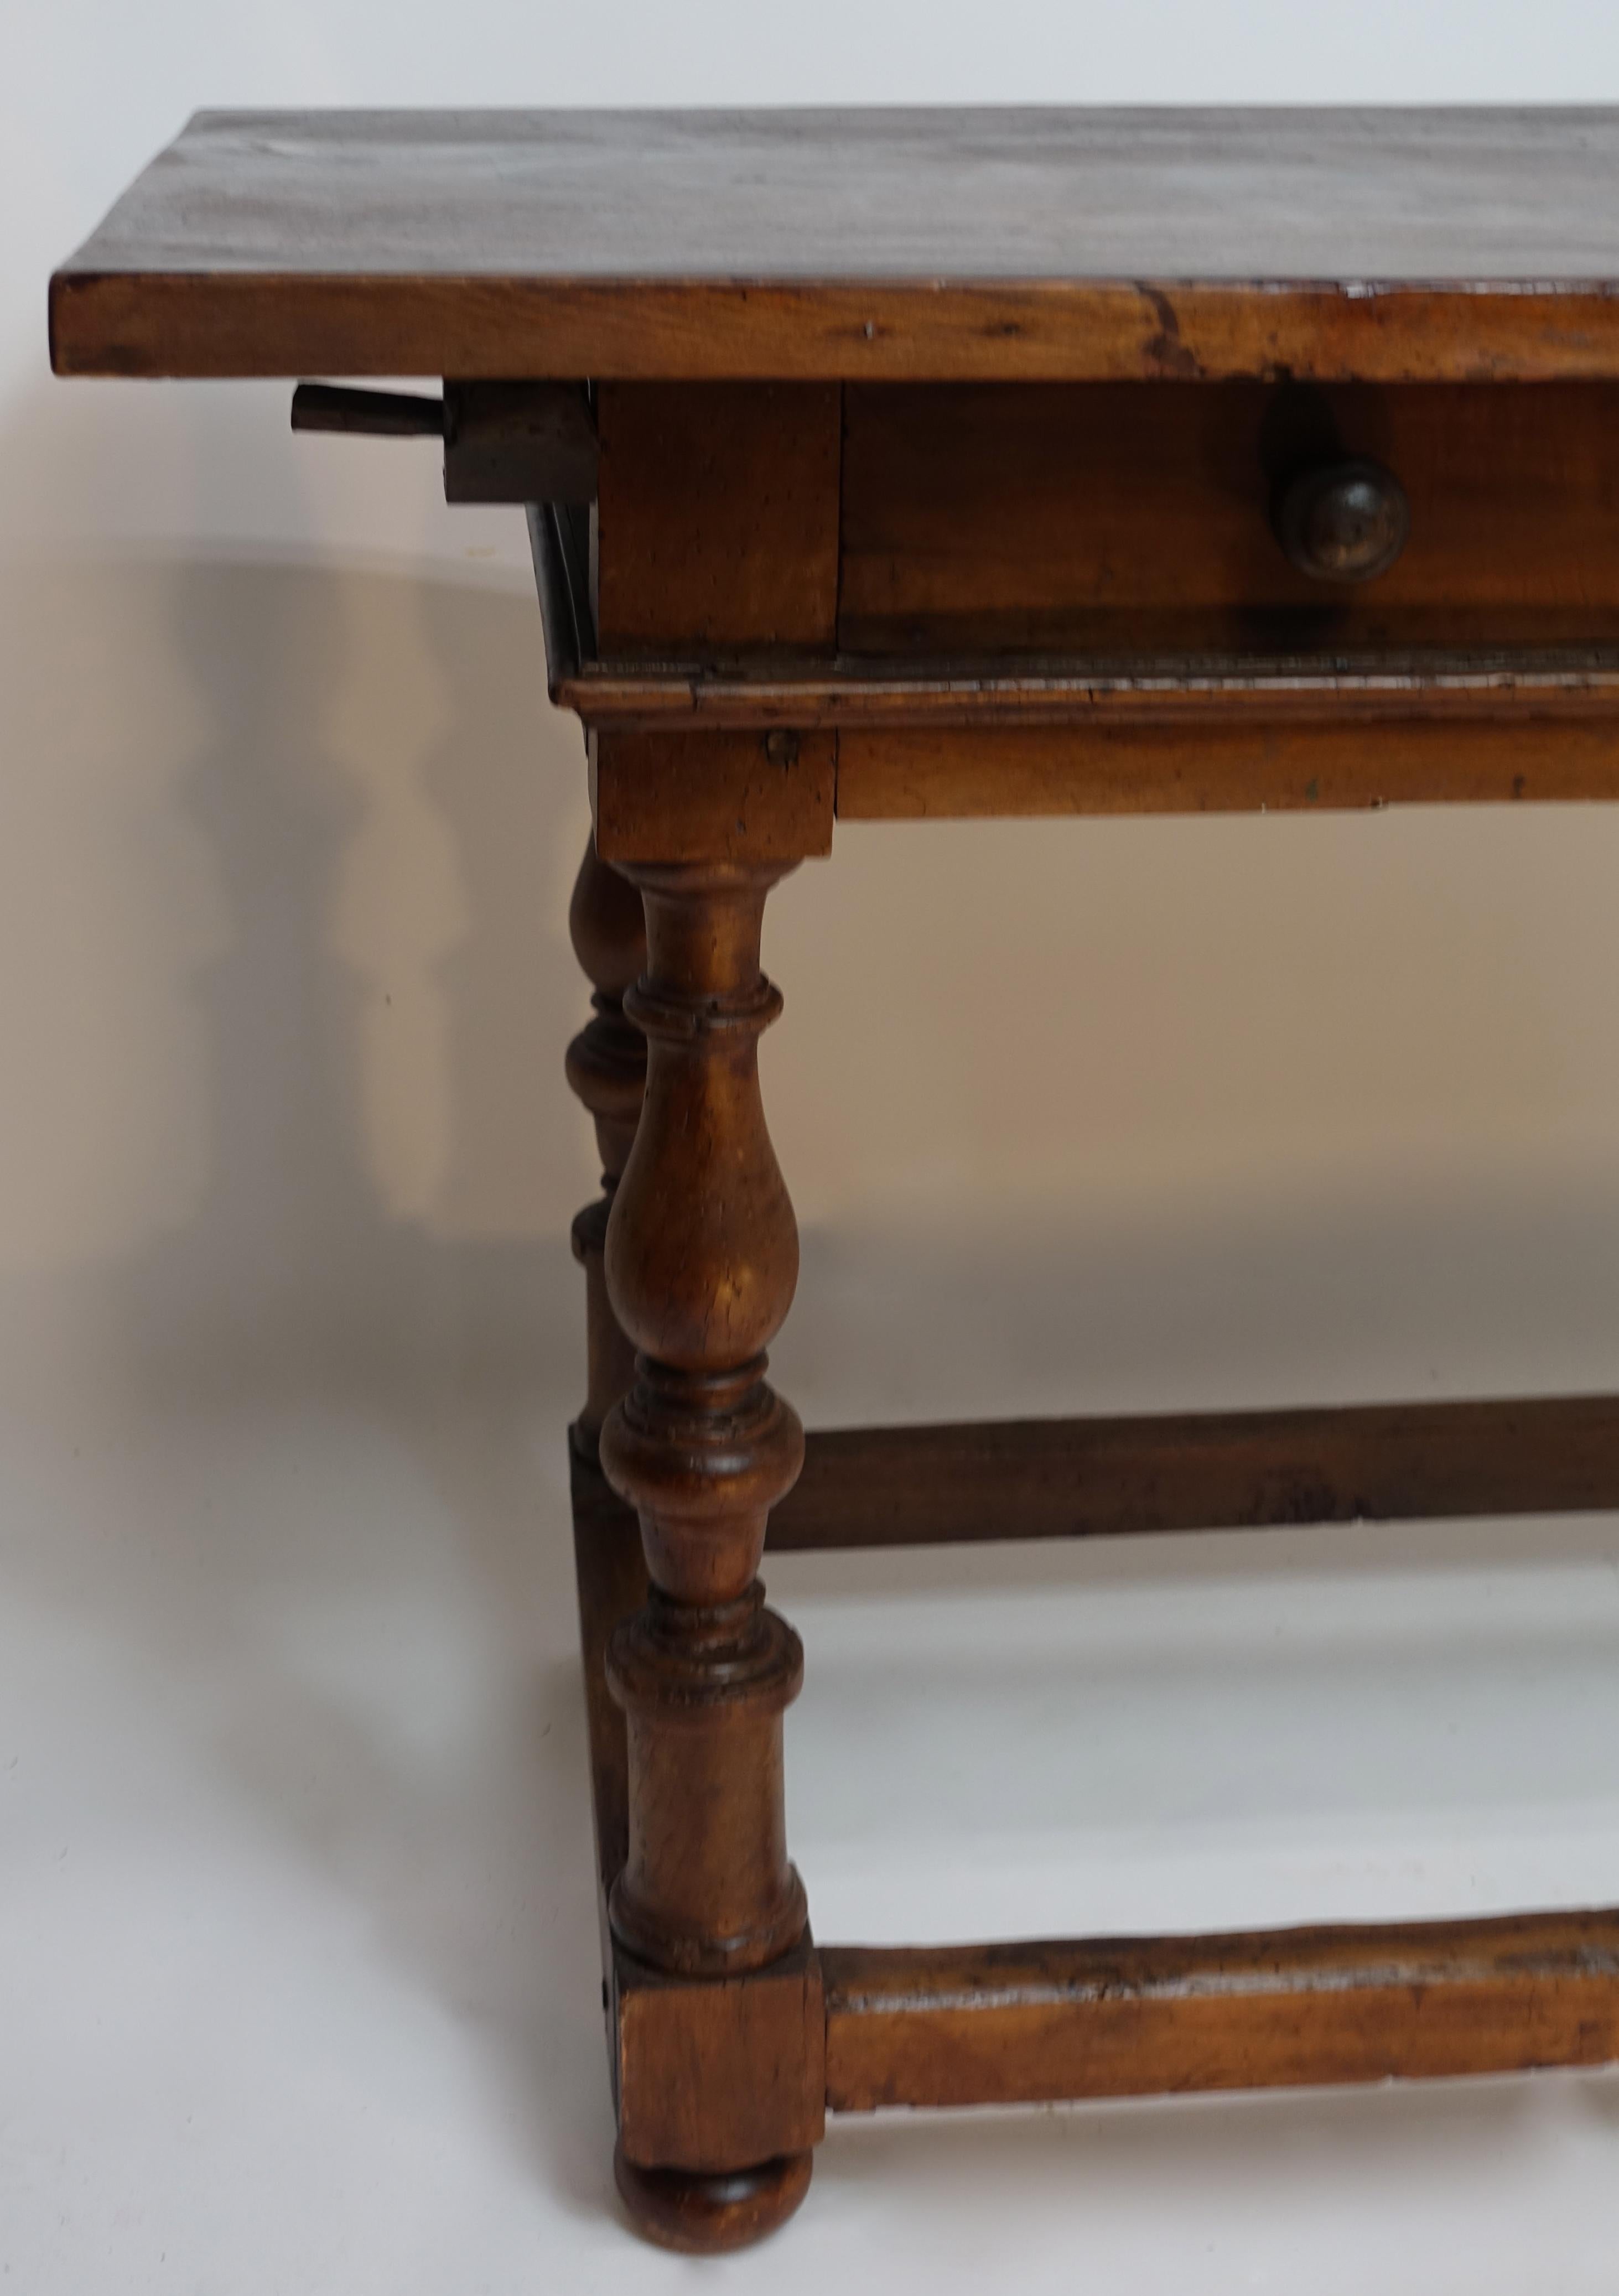 Polished Italian 18th Century Walnut Table with Large Drawer